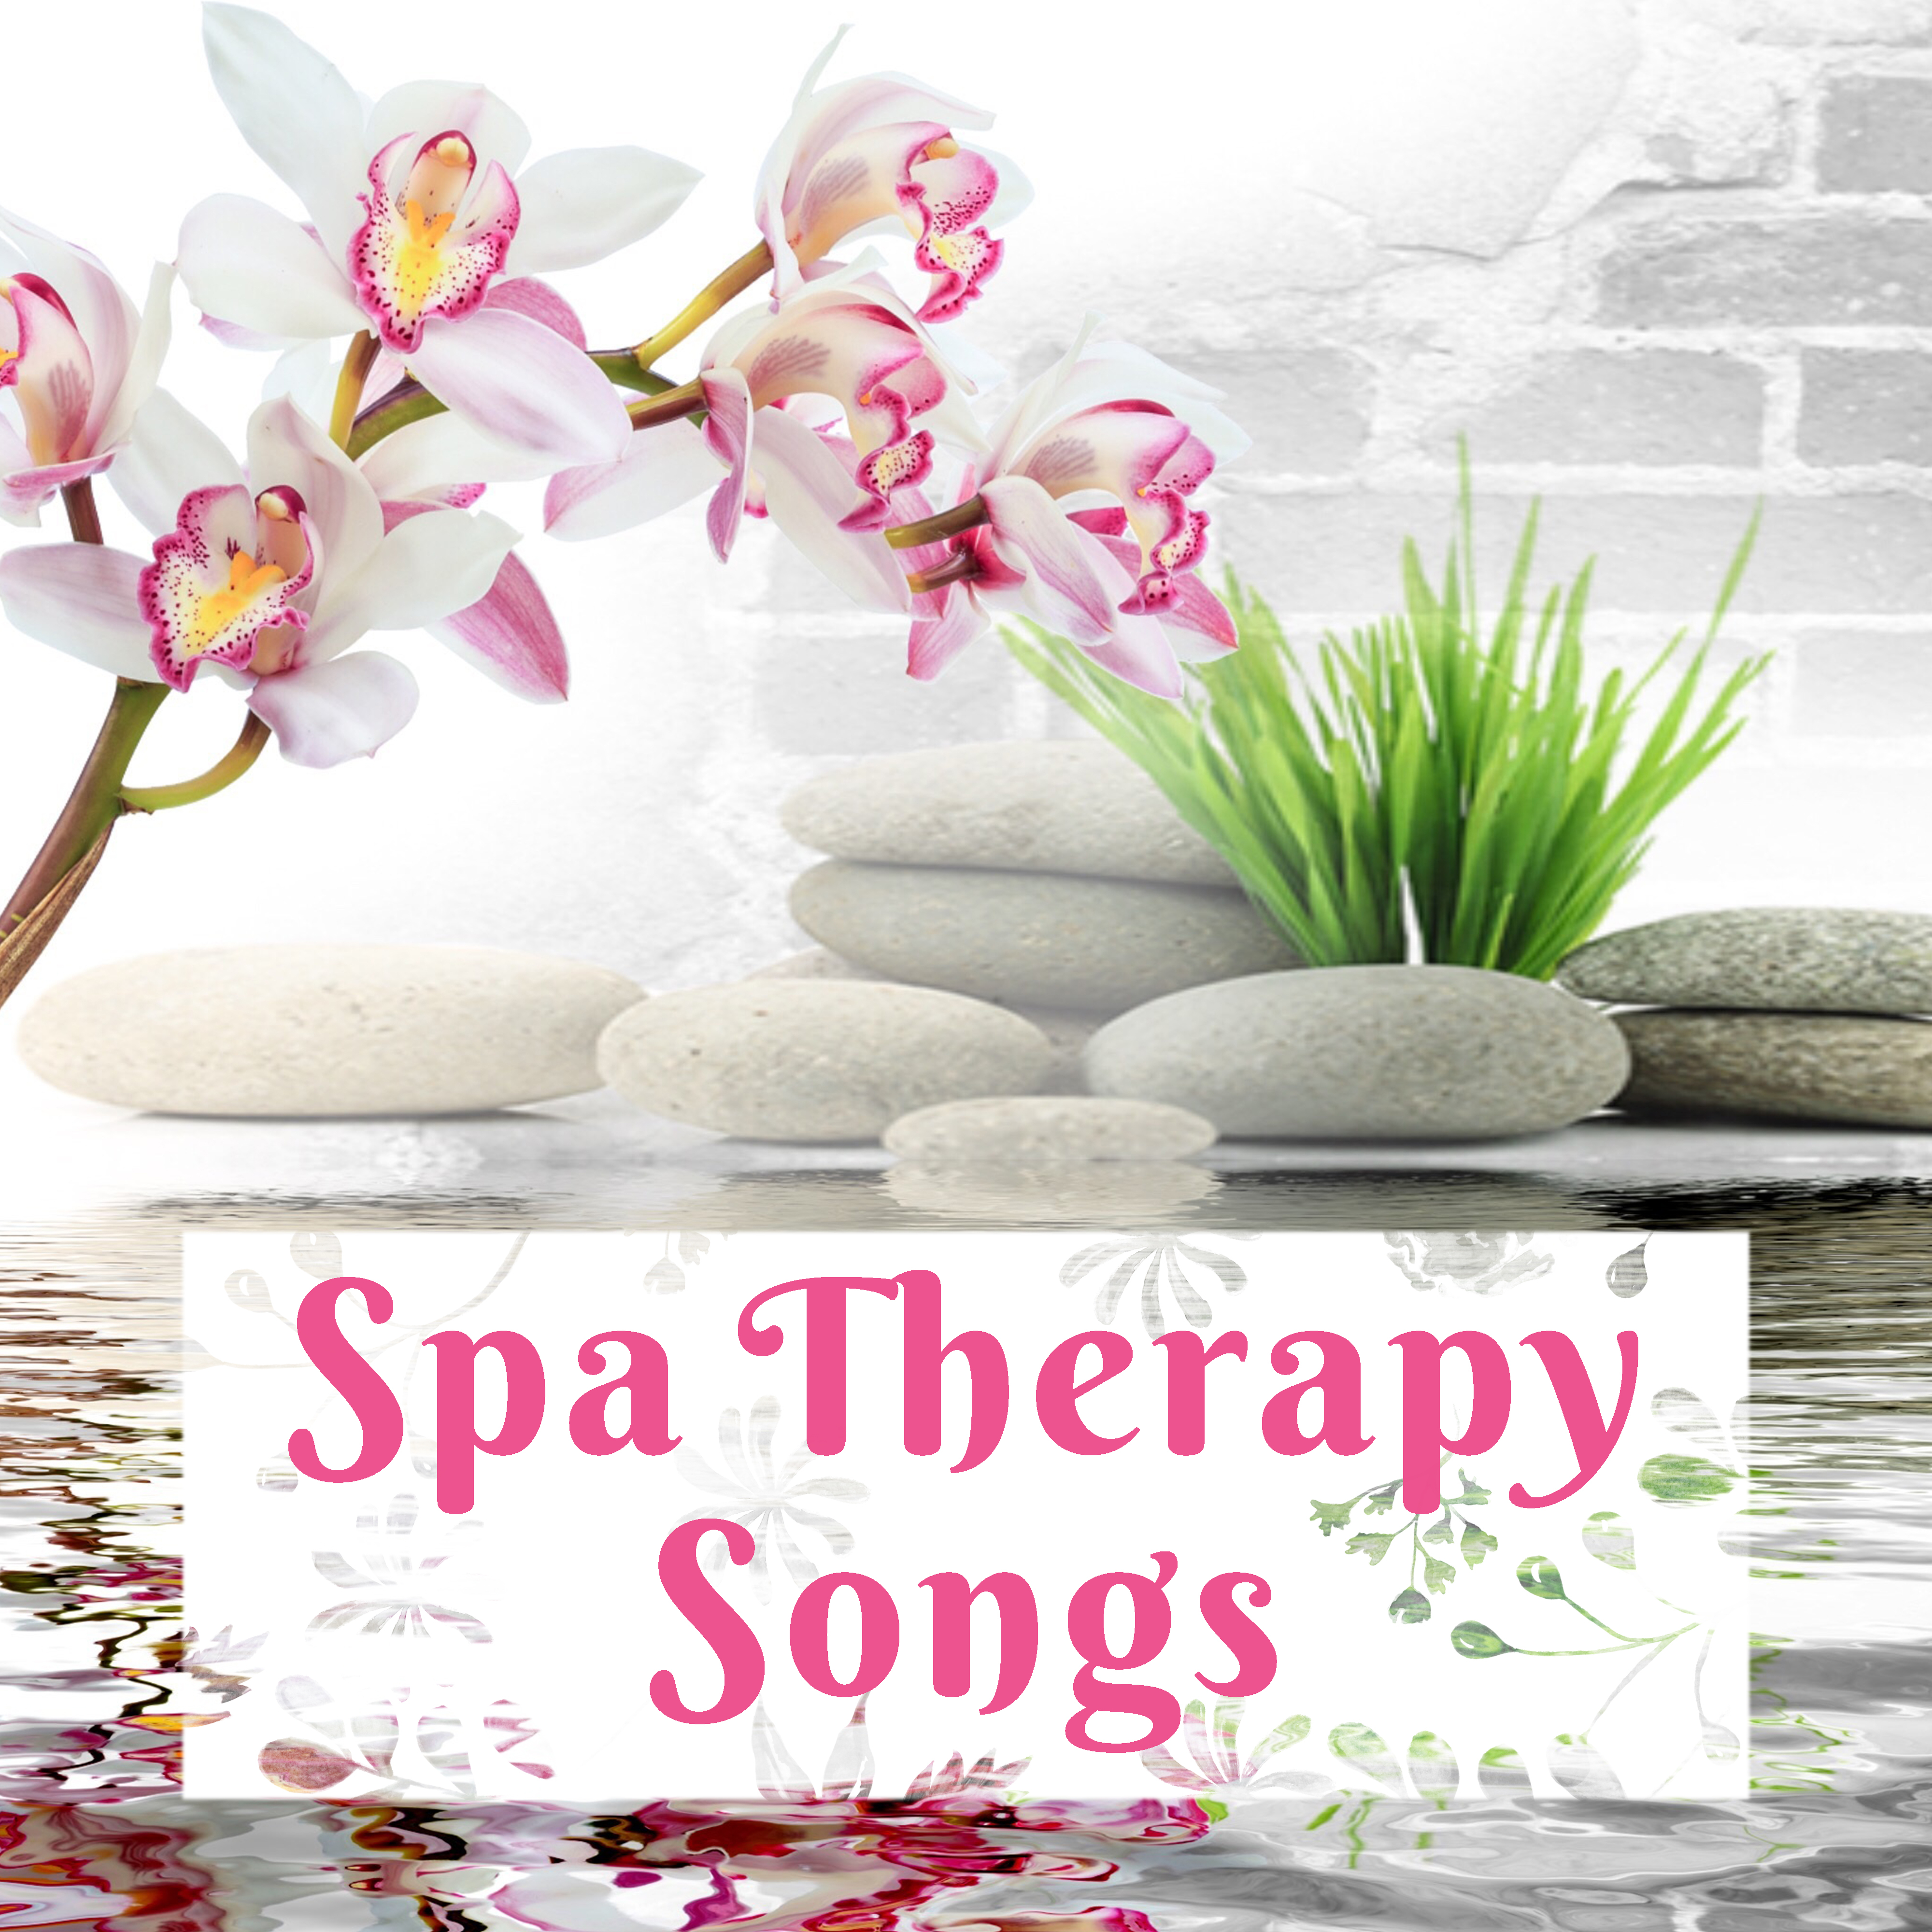 Spa Therapy Songs – Relaxing Music for Spa, Massage, Beauty Treatments, Rest